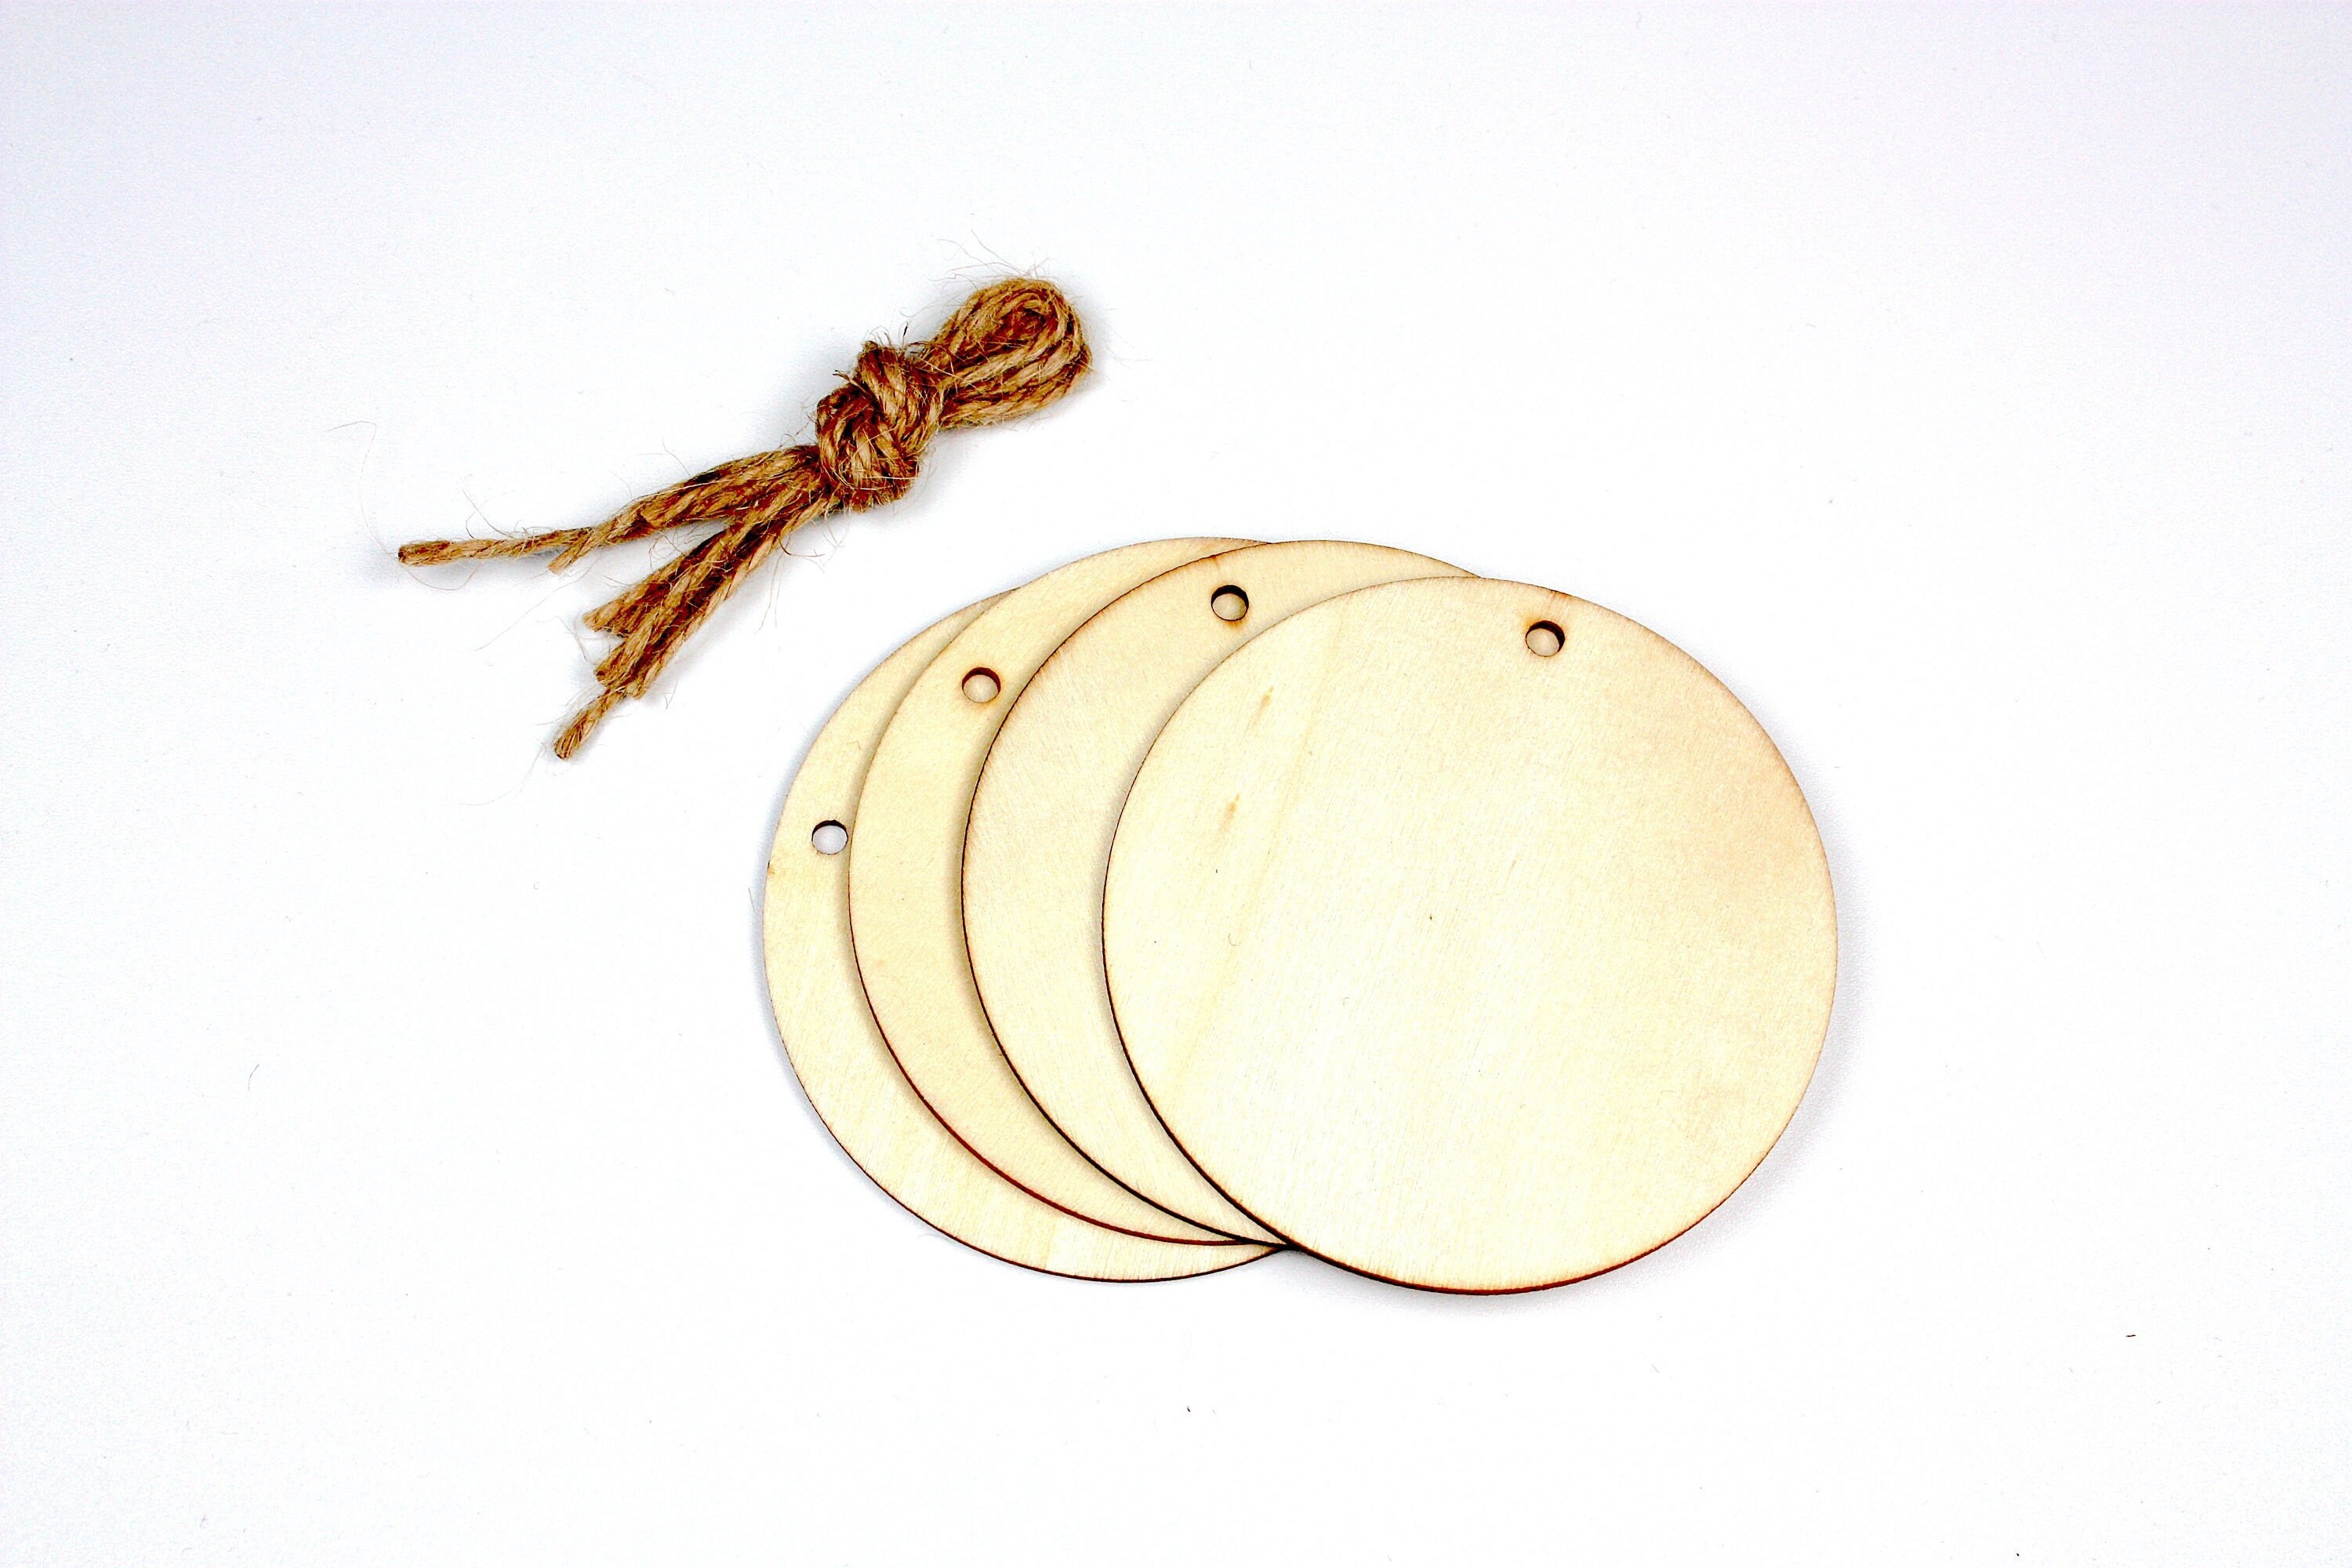 DIY Wood Slices 6-7cm NO Hole Natural Unfinished Circles for Art